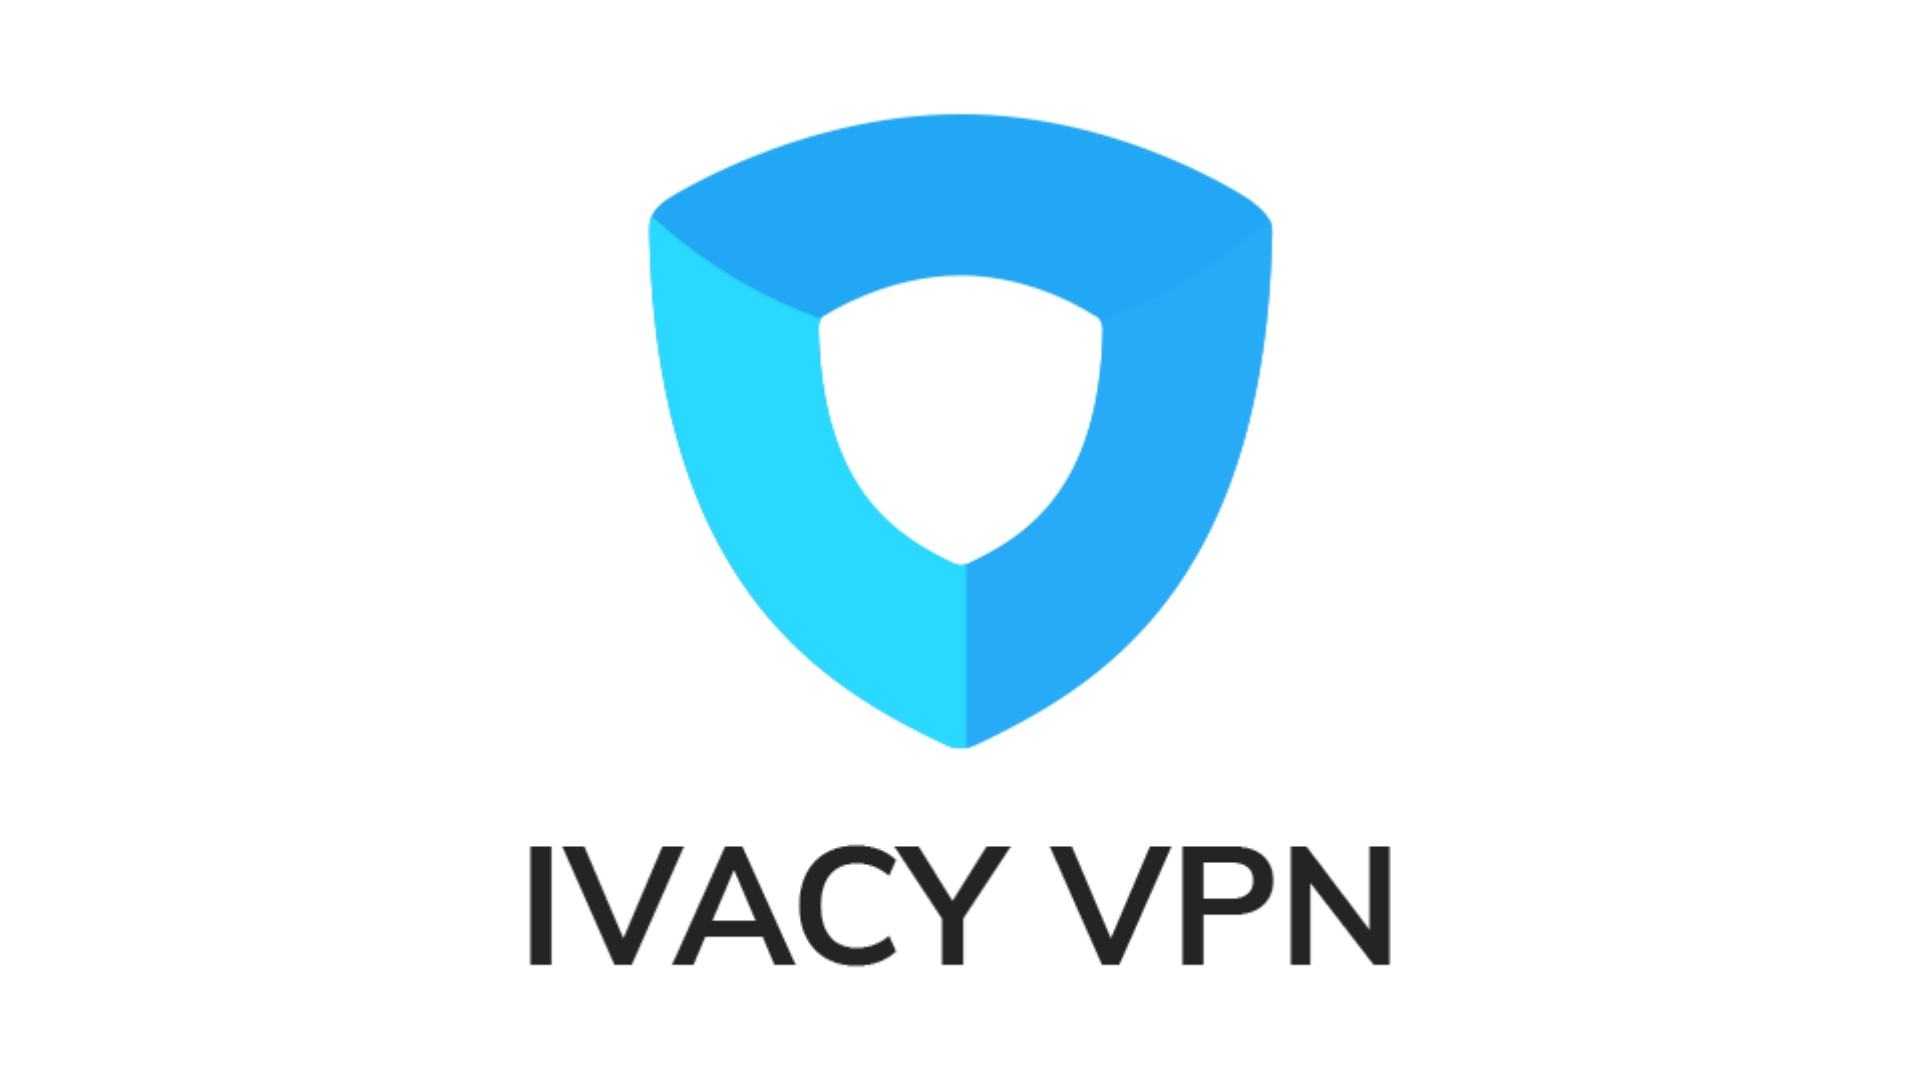 Best Roblox VPN: Ivacy VPN. Image shows the company logo.